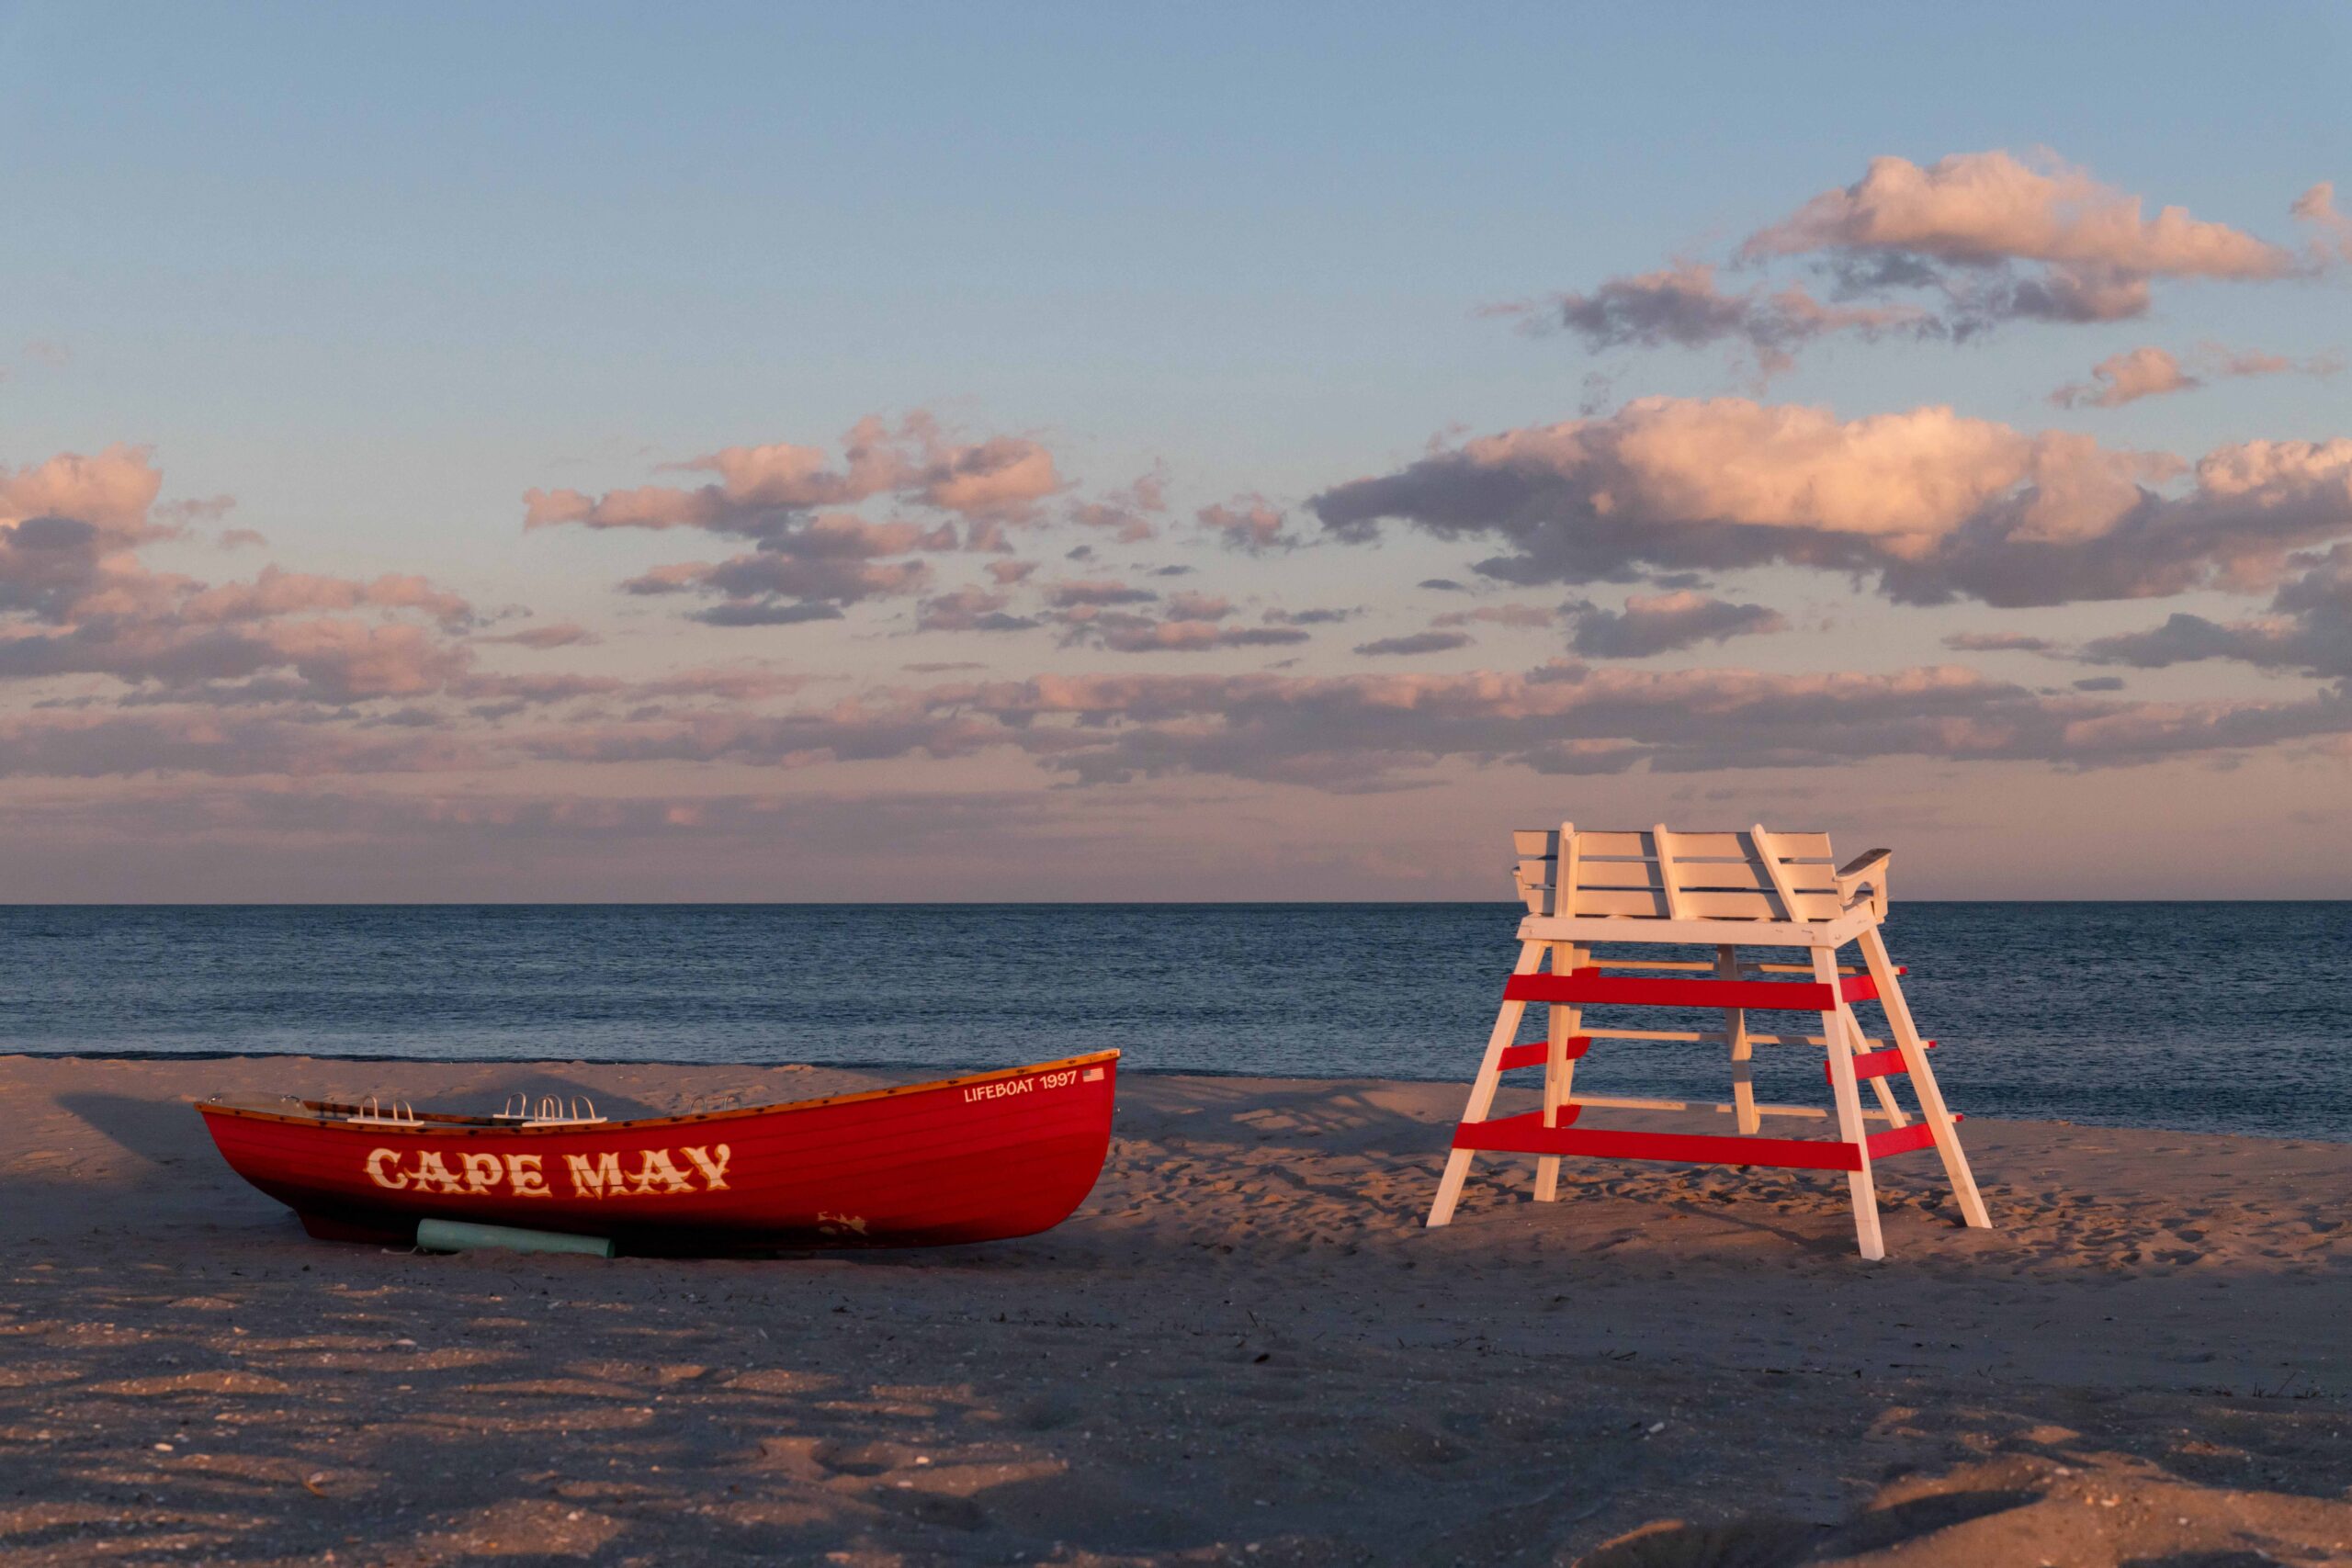 A red lifeguard Cape May boat and a lifeguard stand at sunset with the ocean and clouds in the background